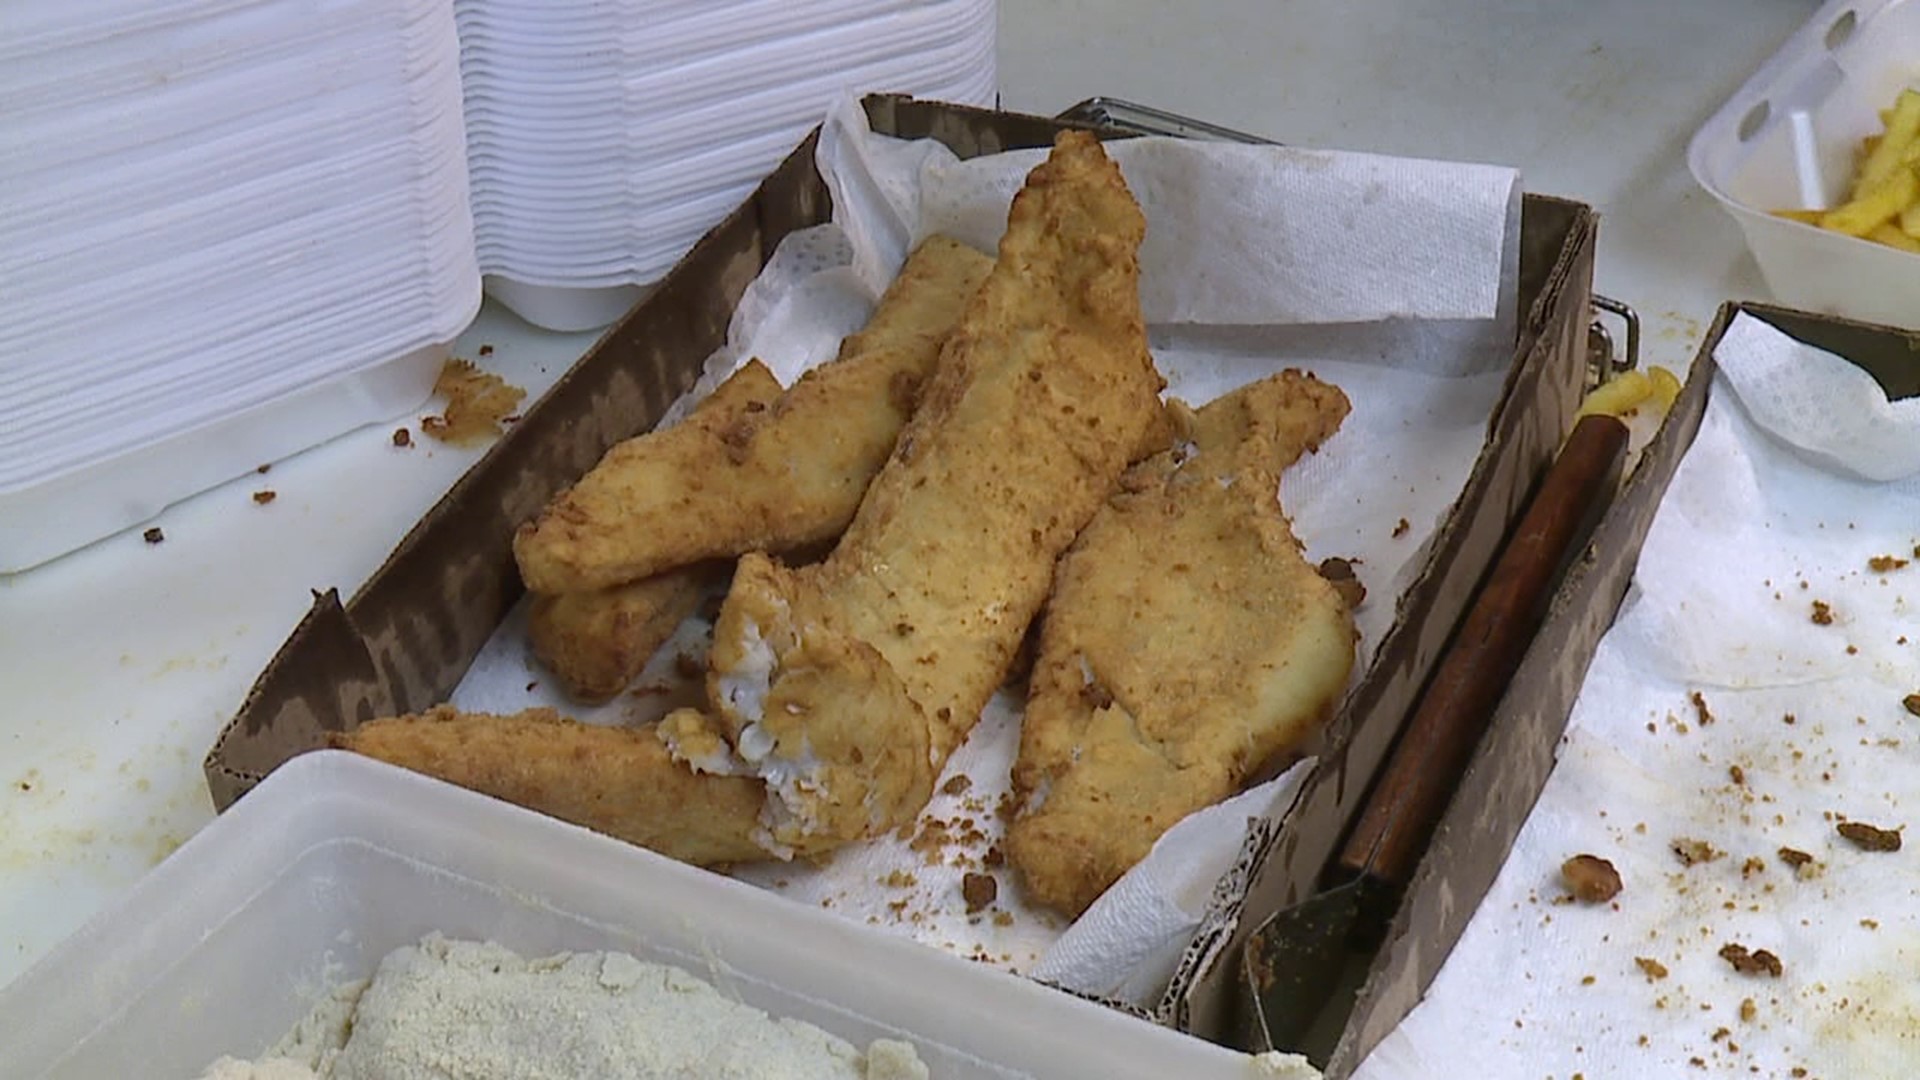 A traditional Good Friday fish fry in Lackawanna County has a devoted following with hundreds of people flocking to Jermyn for the event.